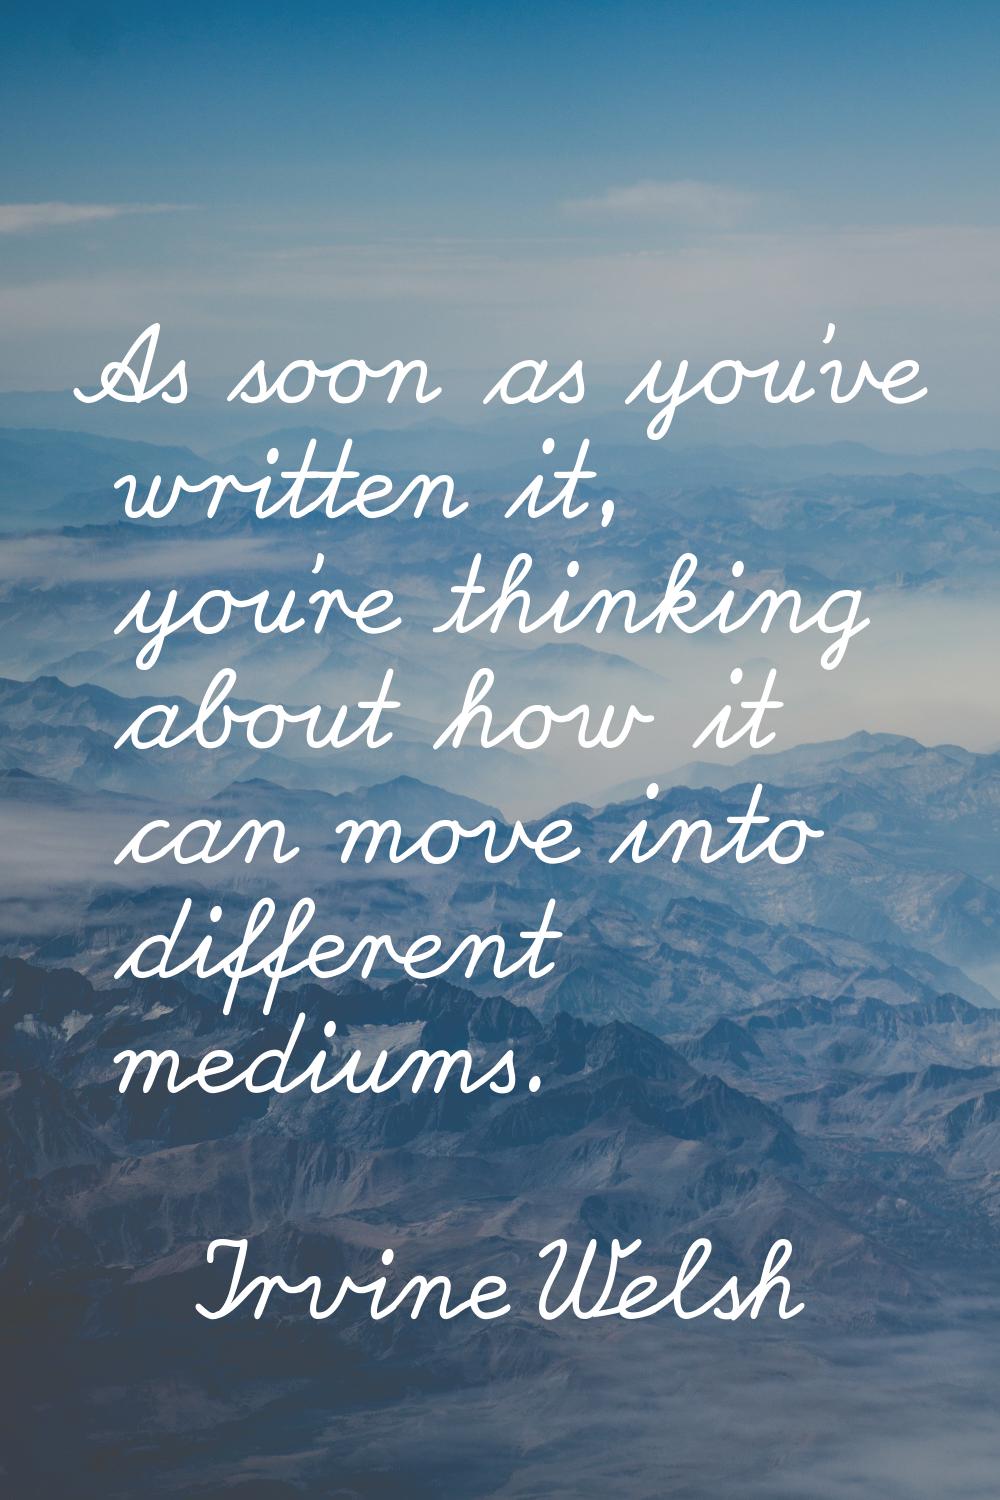 As soon as you've written it, you're thinking about how it can move into different mediums.